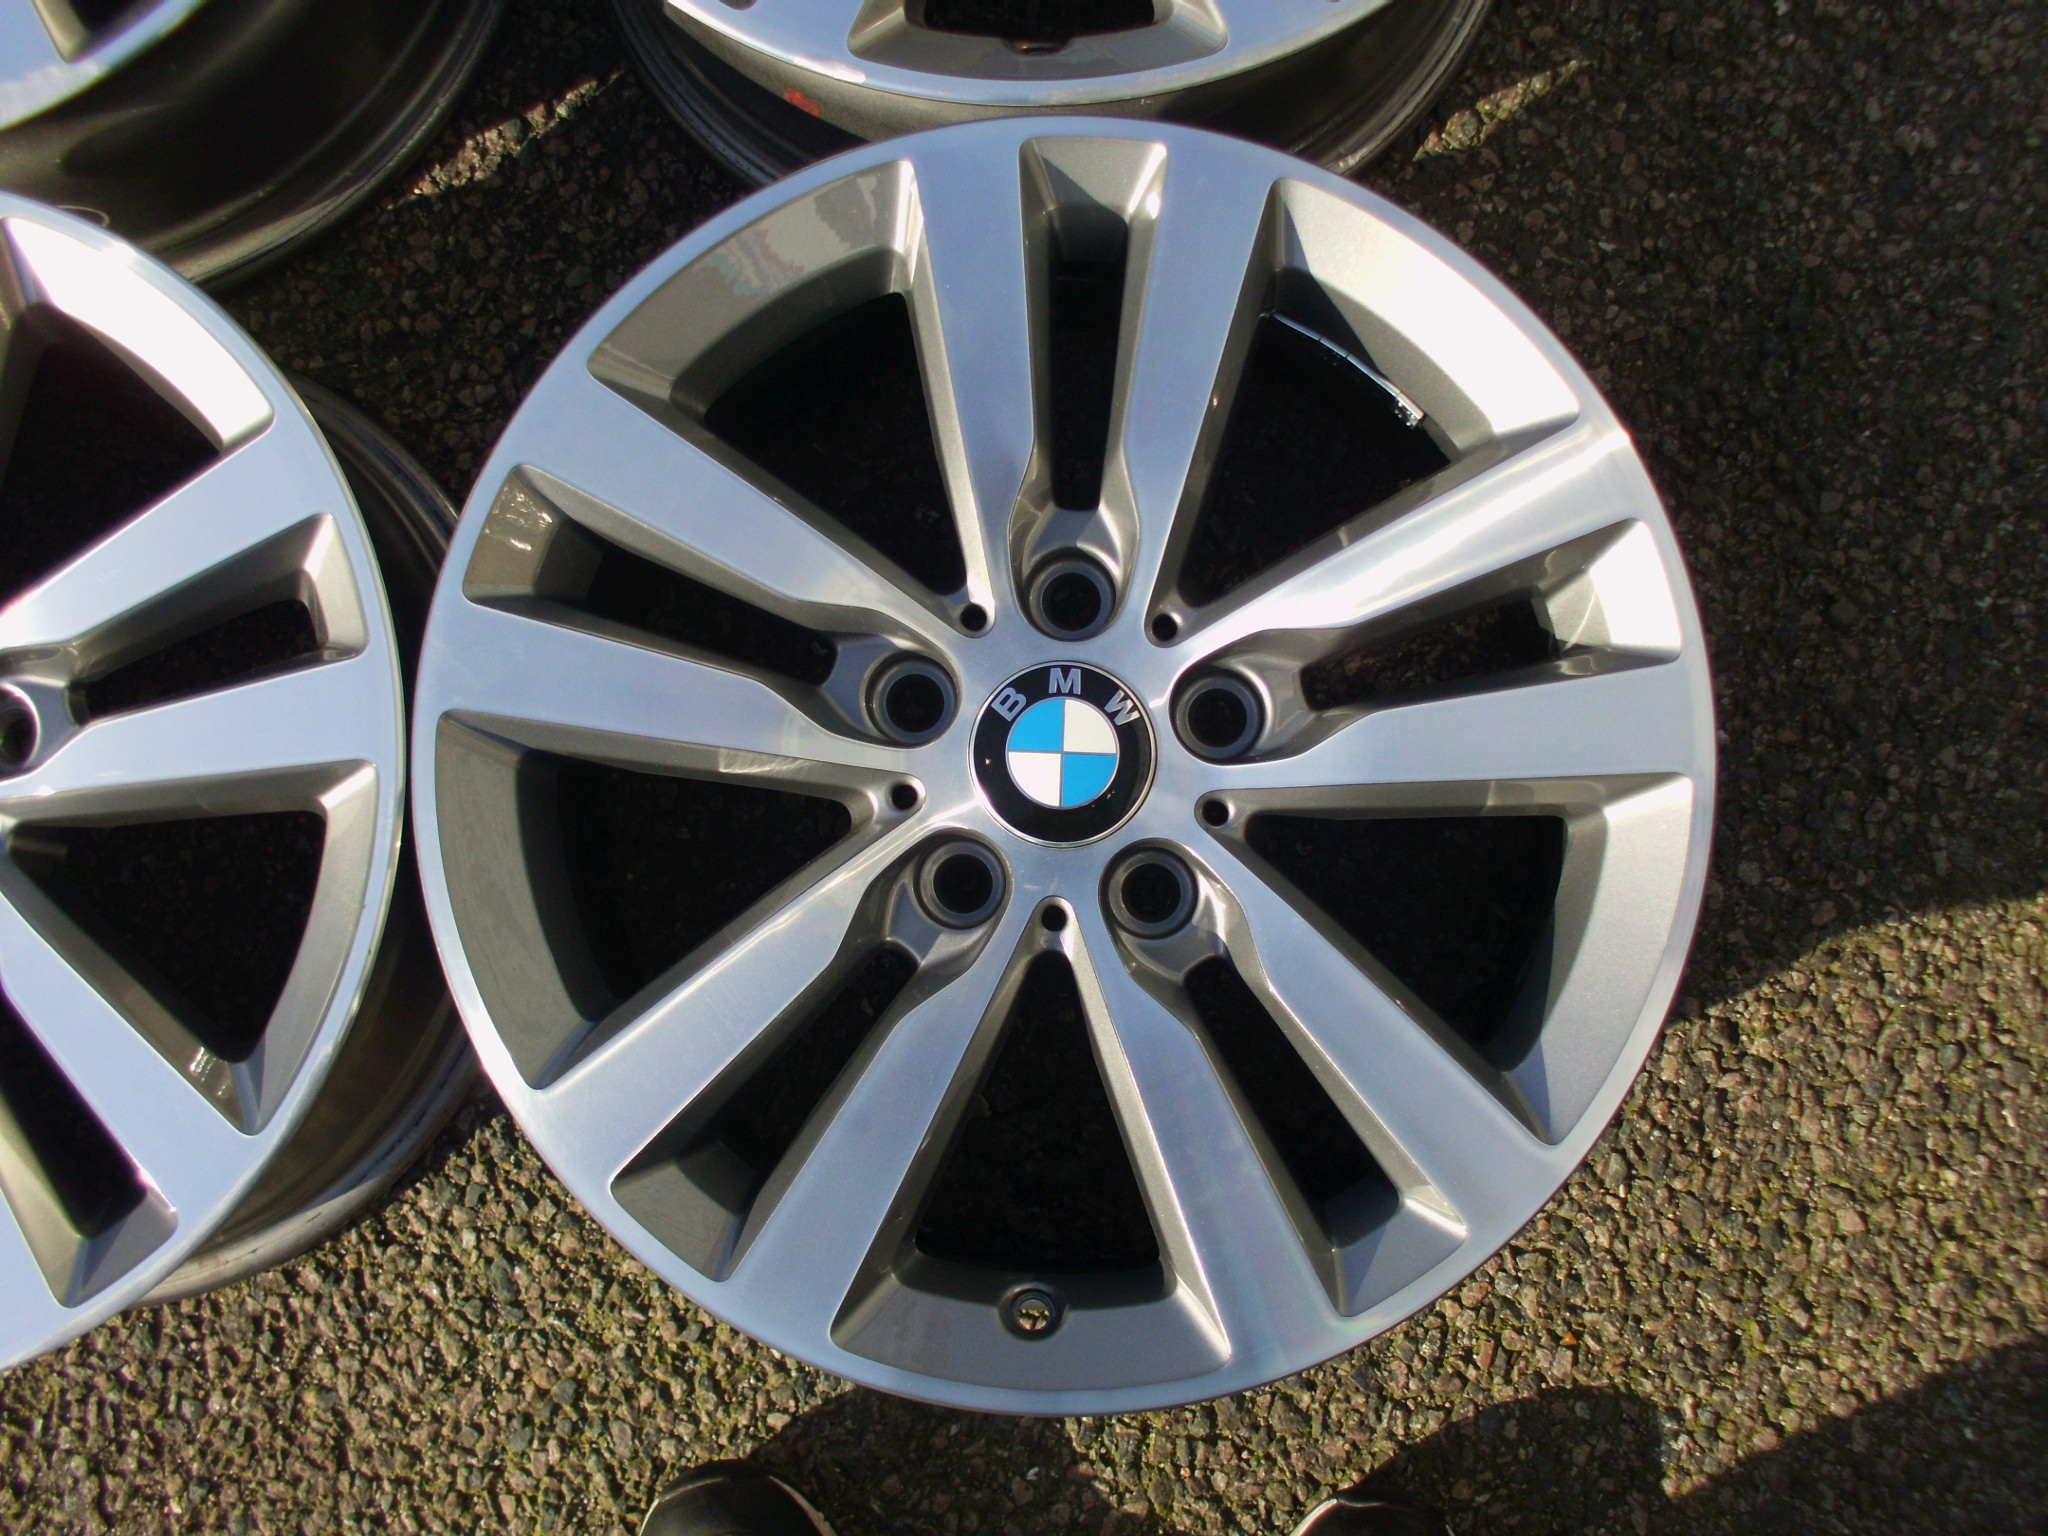 USED 17  GENUINE BMW STYLE 655 DOUBLE SPOKE ALLOY WHEELS GOOD CONDITION  IN LIGHT GUNMETAL WITH POLISHED FACE